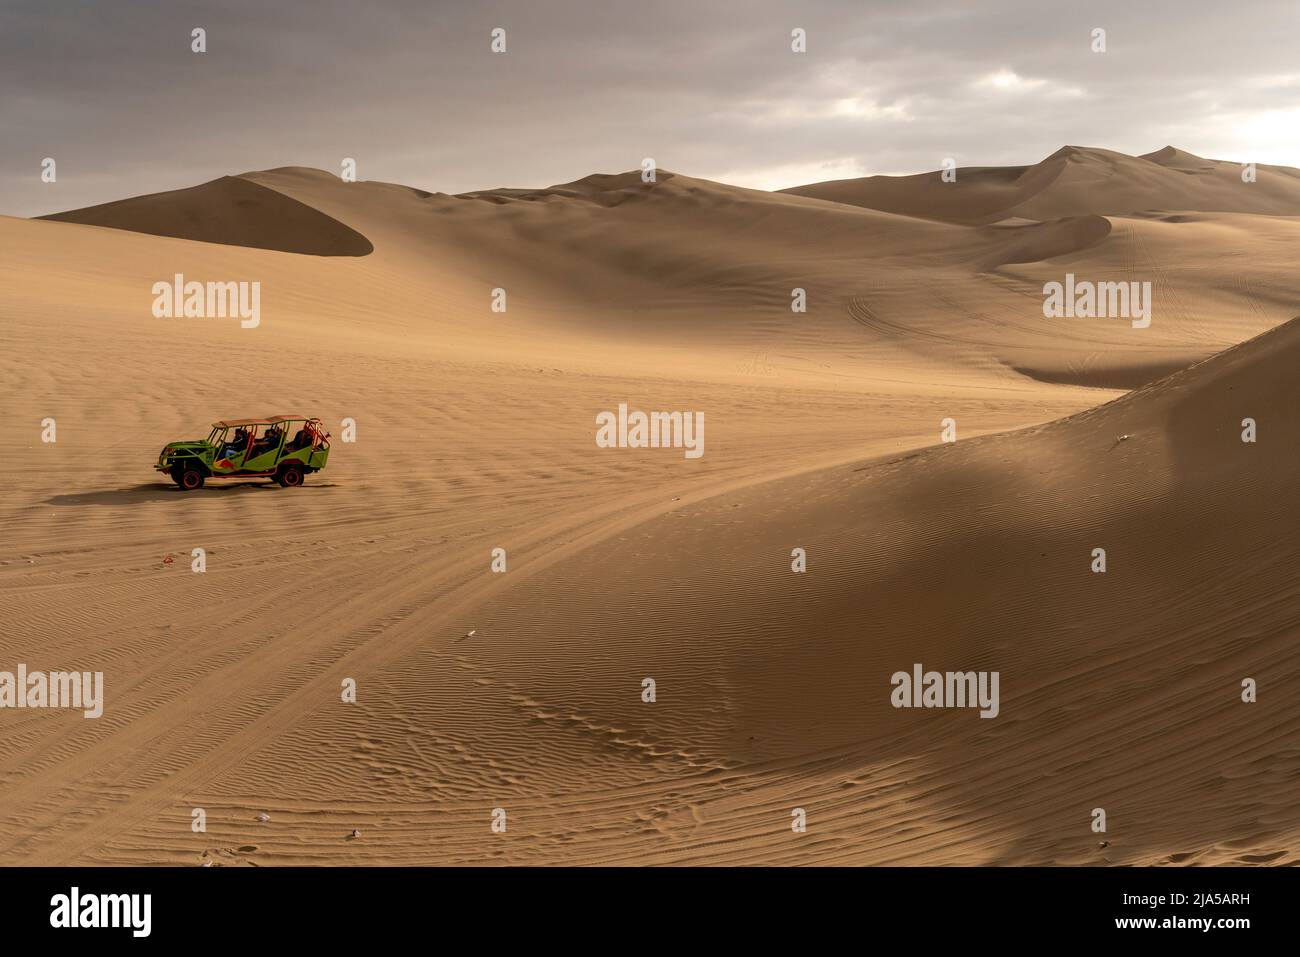 A Dune Buggy On The Sand Dunes Near The Desert Oasis Village Of Huacachina, Ica Province, Peru. Stock Photo